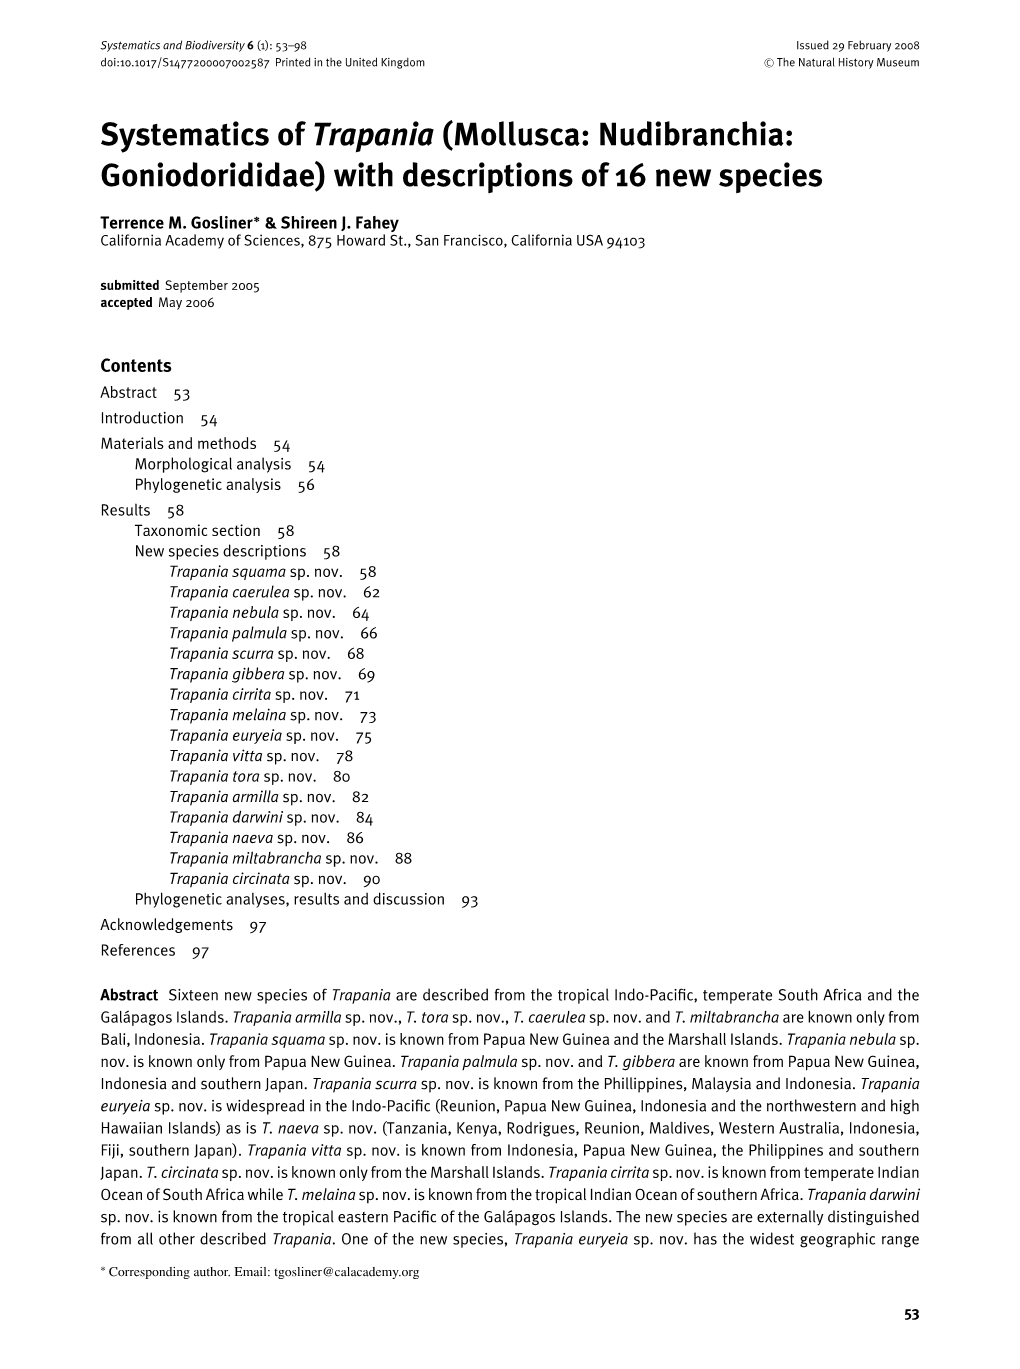 Systematics of Trapania (Mollusca: Nudibranchia: Goniodorididae) with Descriptions of 16 New Species